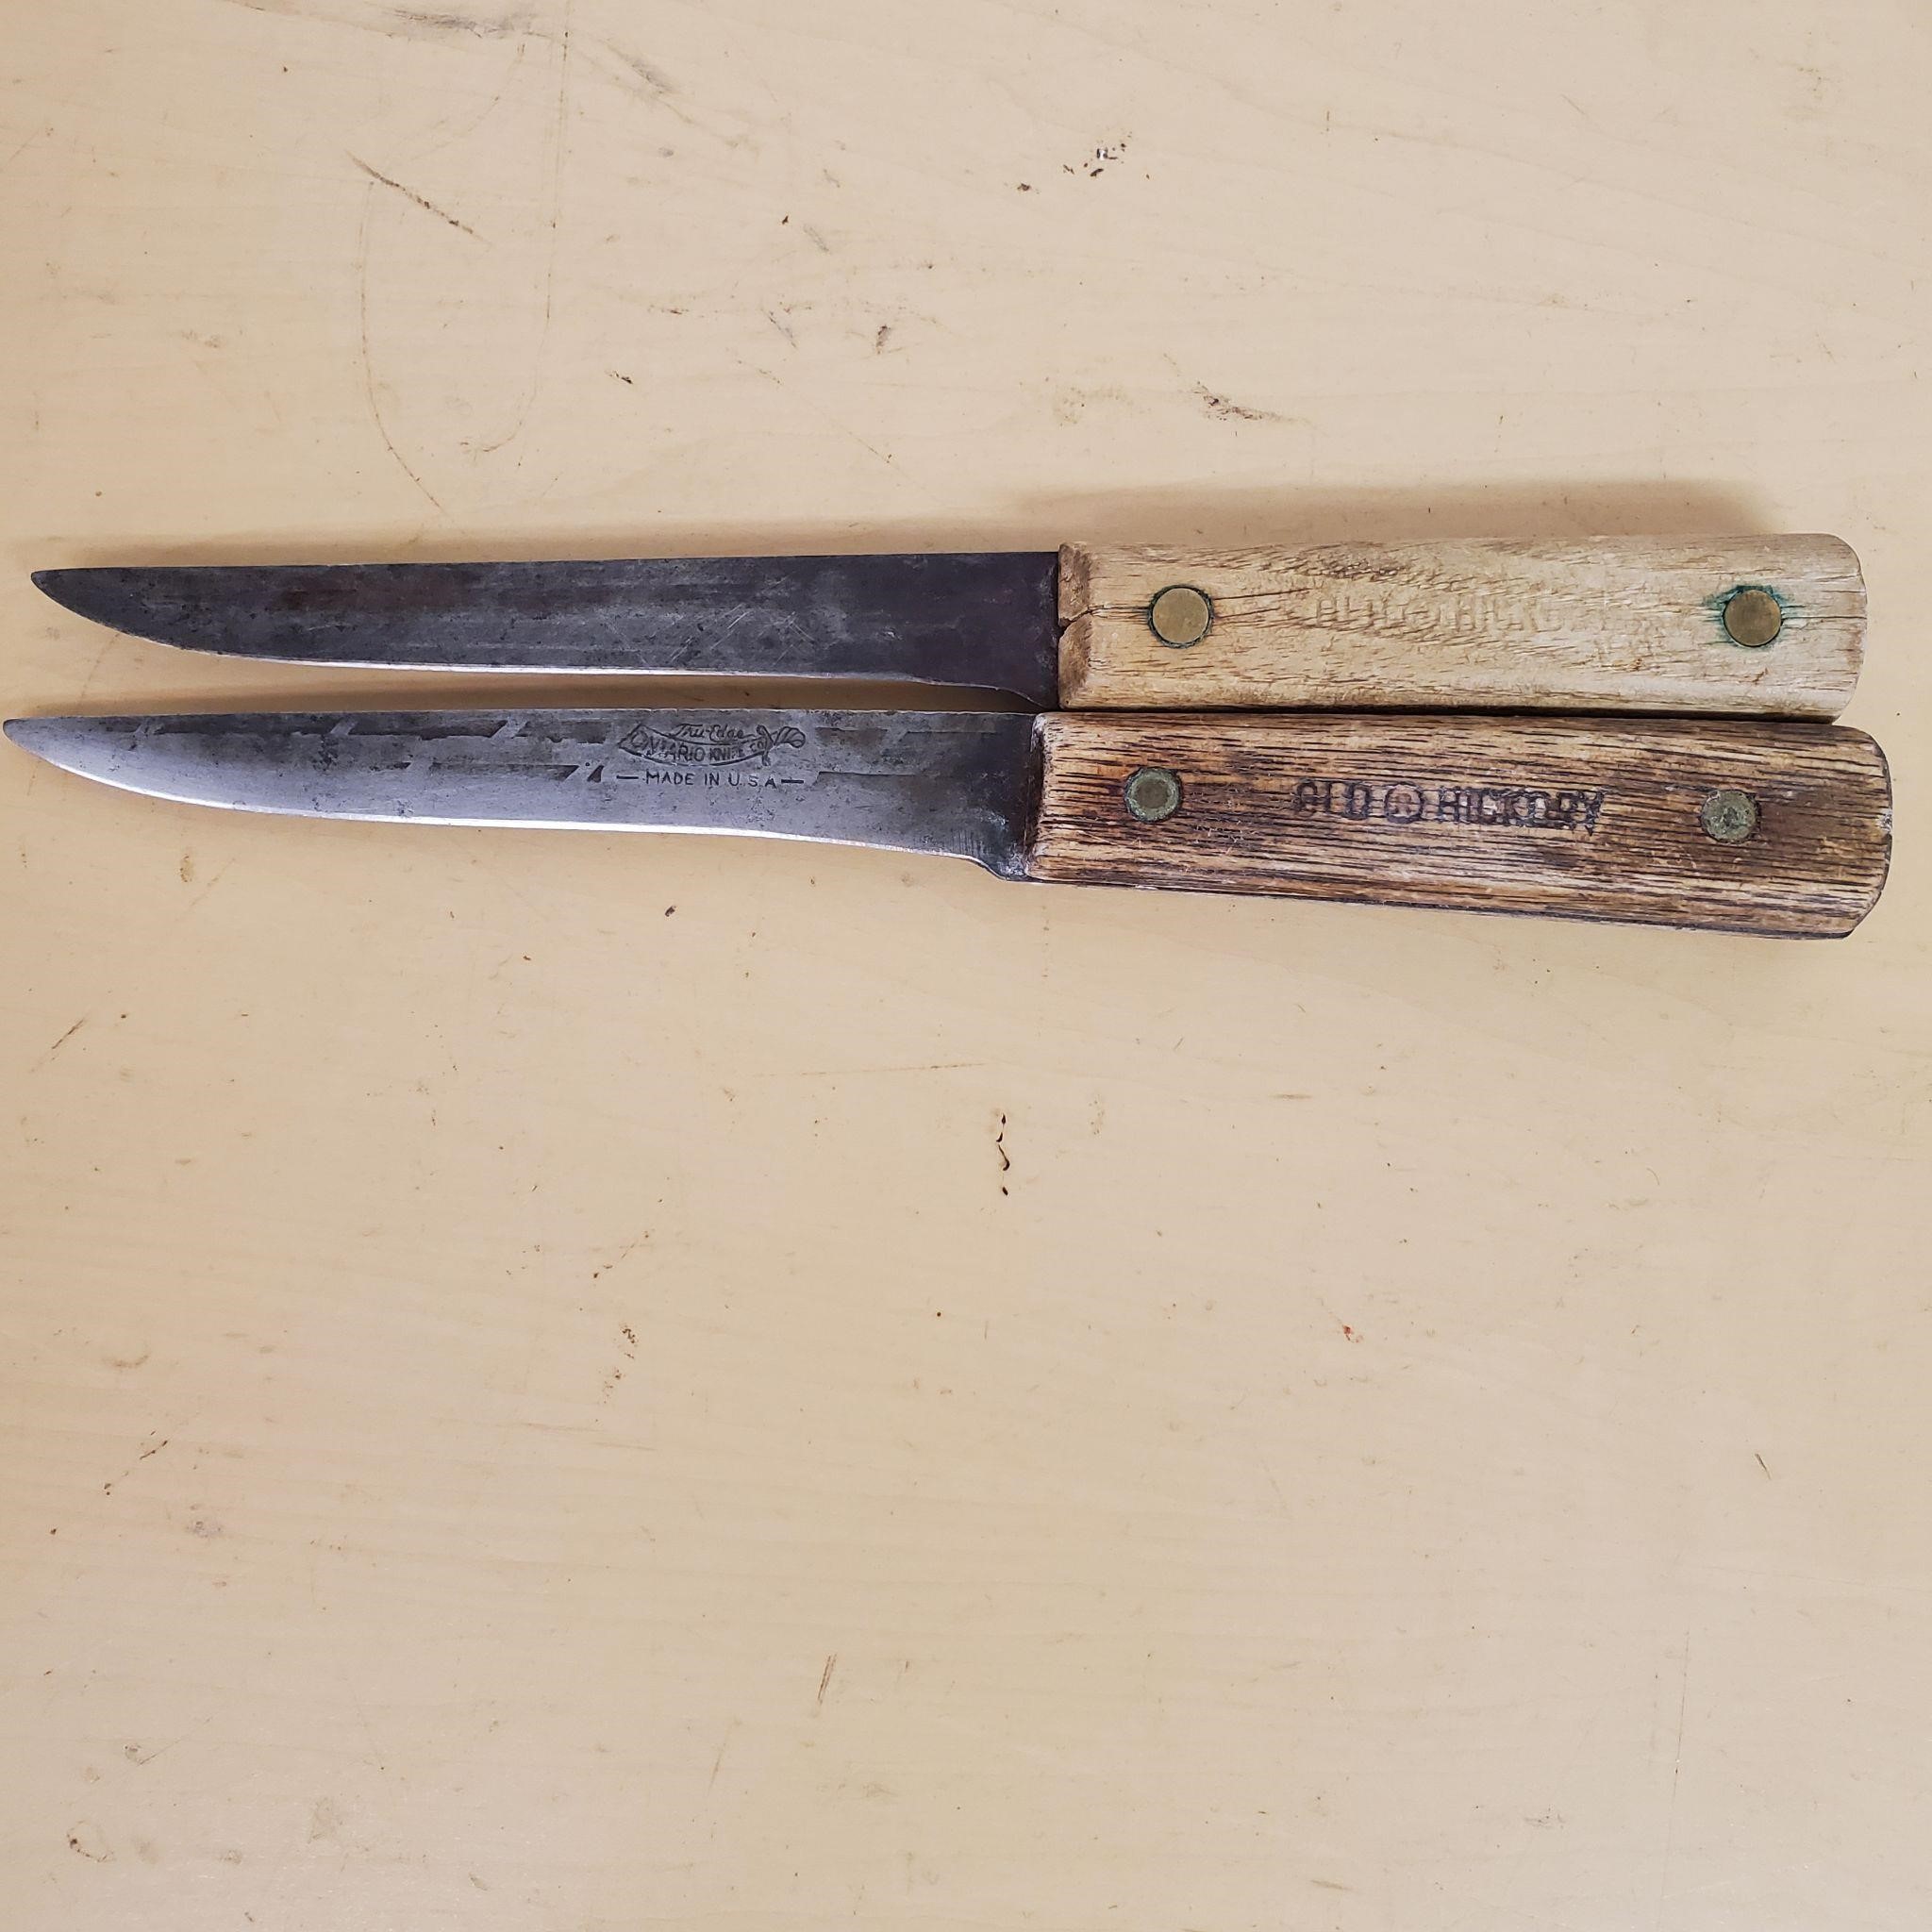 2 Old Hickory Brand Knives